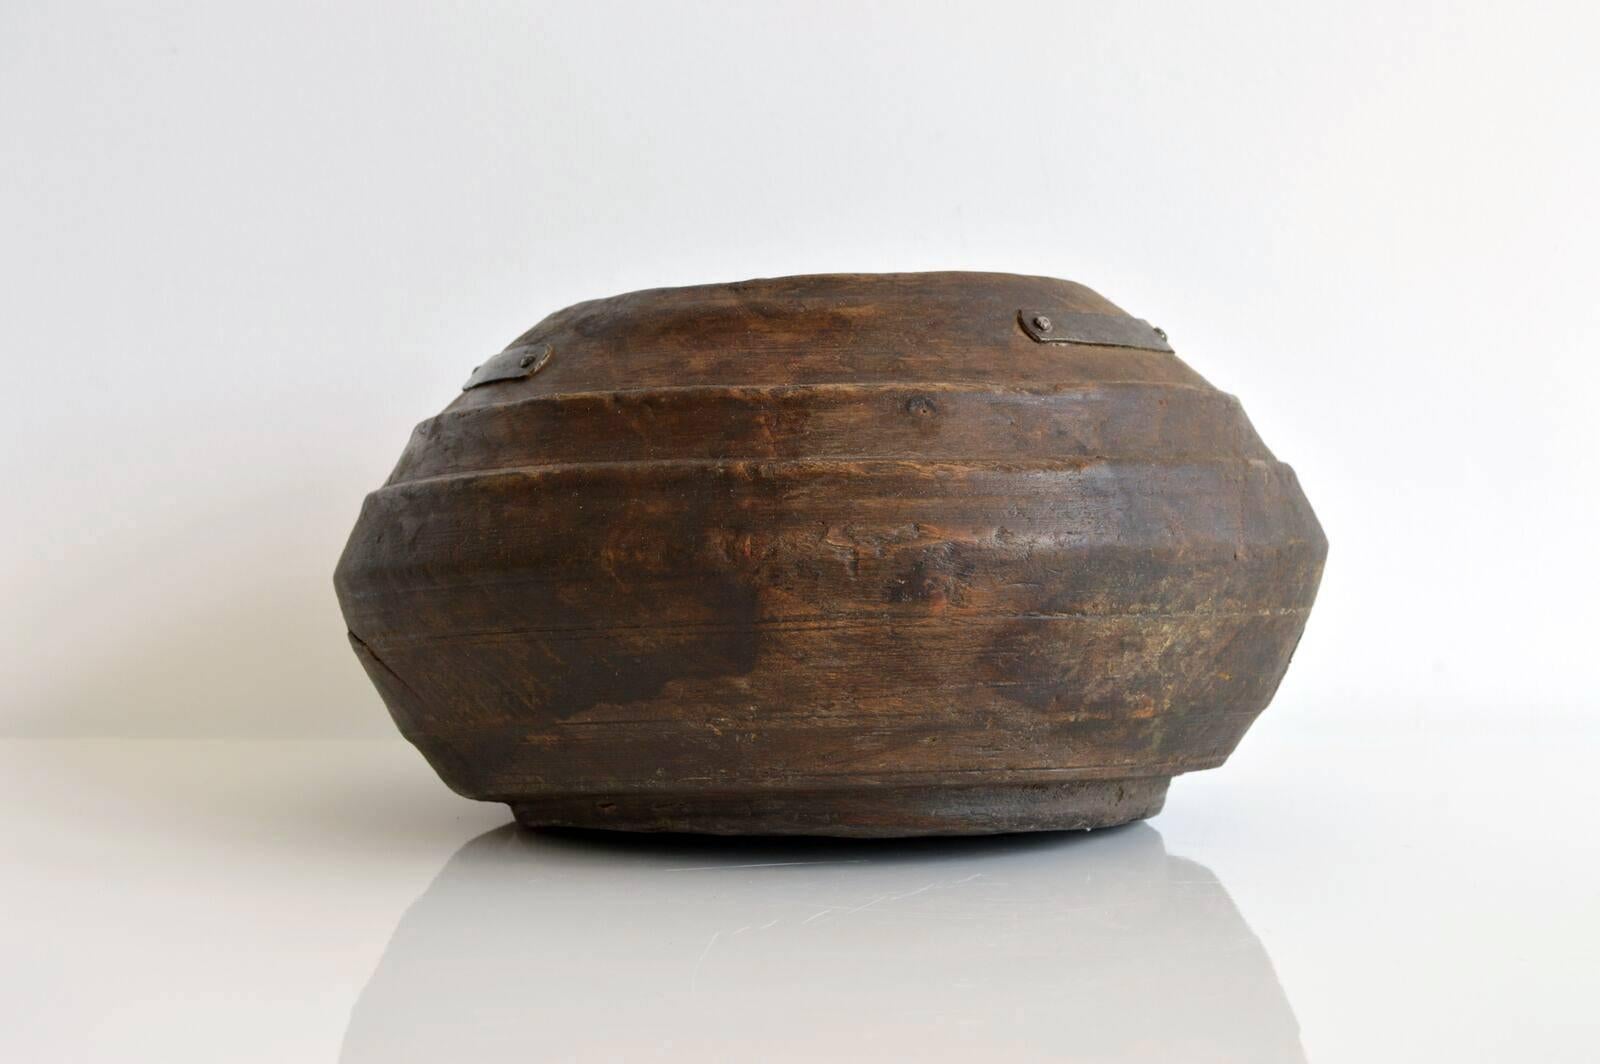 Rustic carved wood vessel by an unknown artisan, originally from Iran. The bowl has a beautiful patina finish with metal hardware detail on either side of the top of the bowl's exterior. This piece would make a great natural decorative object,